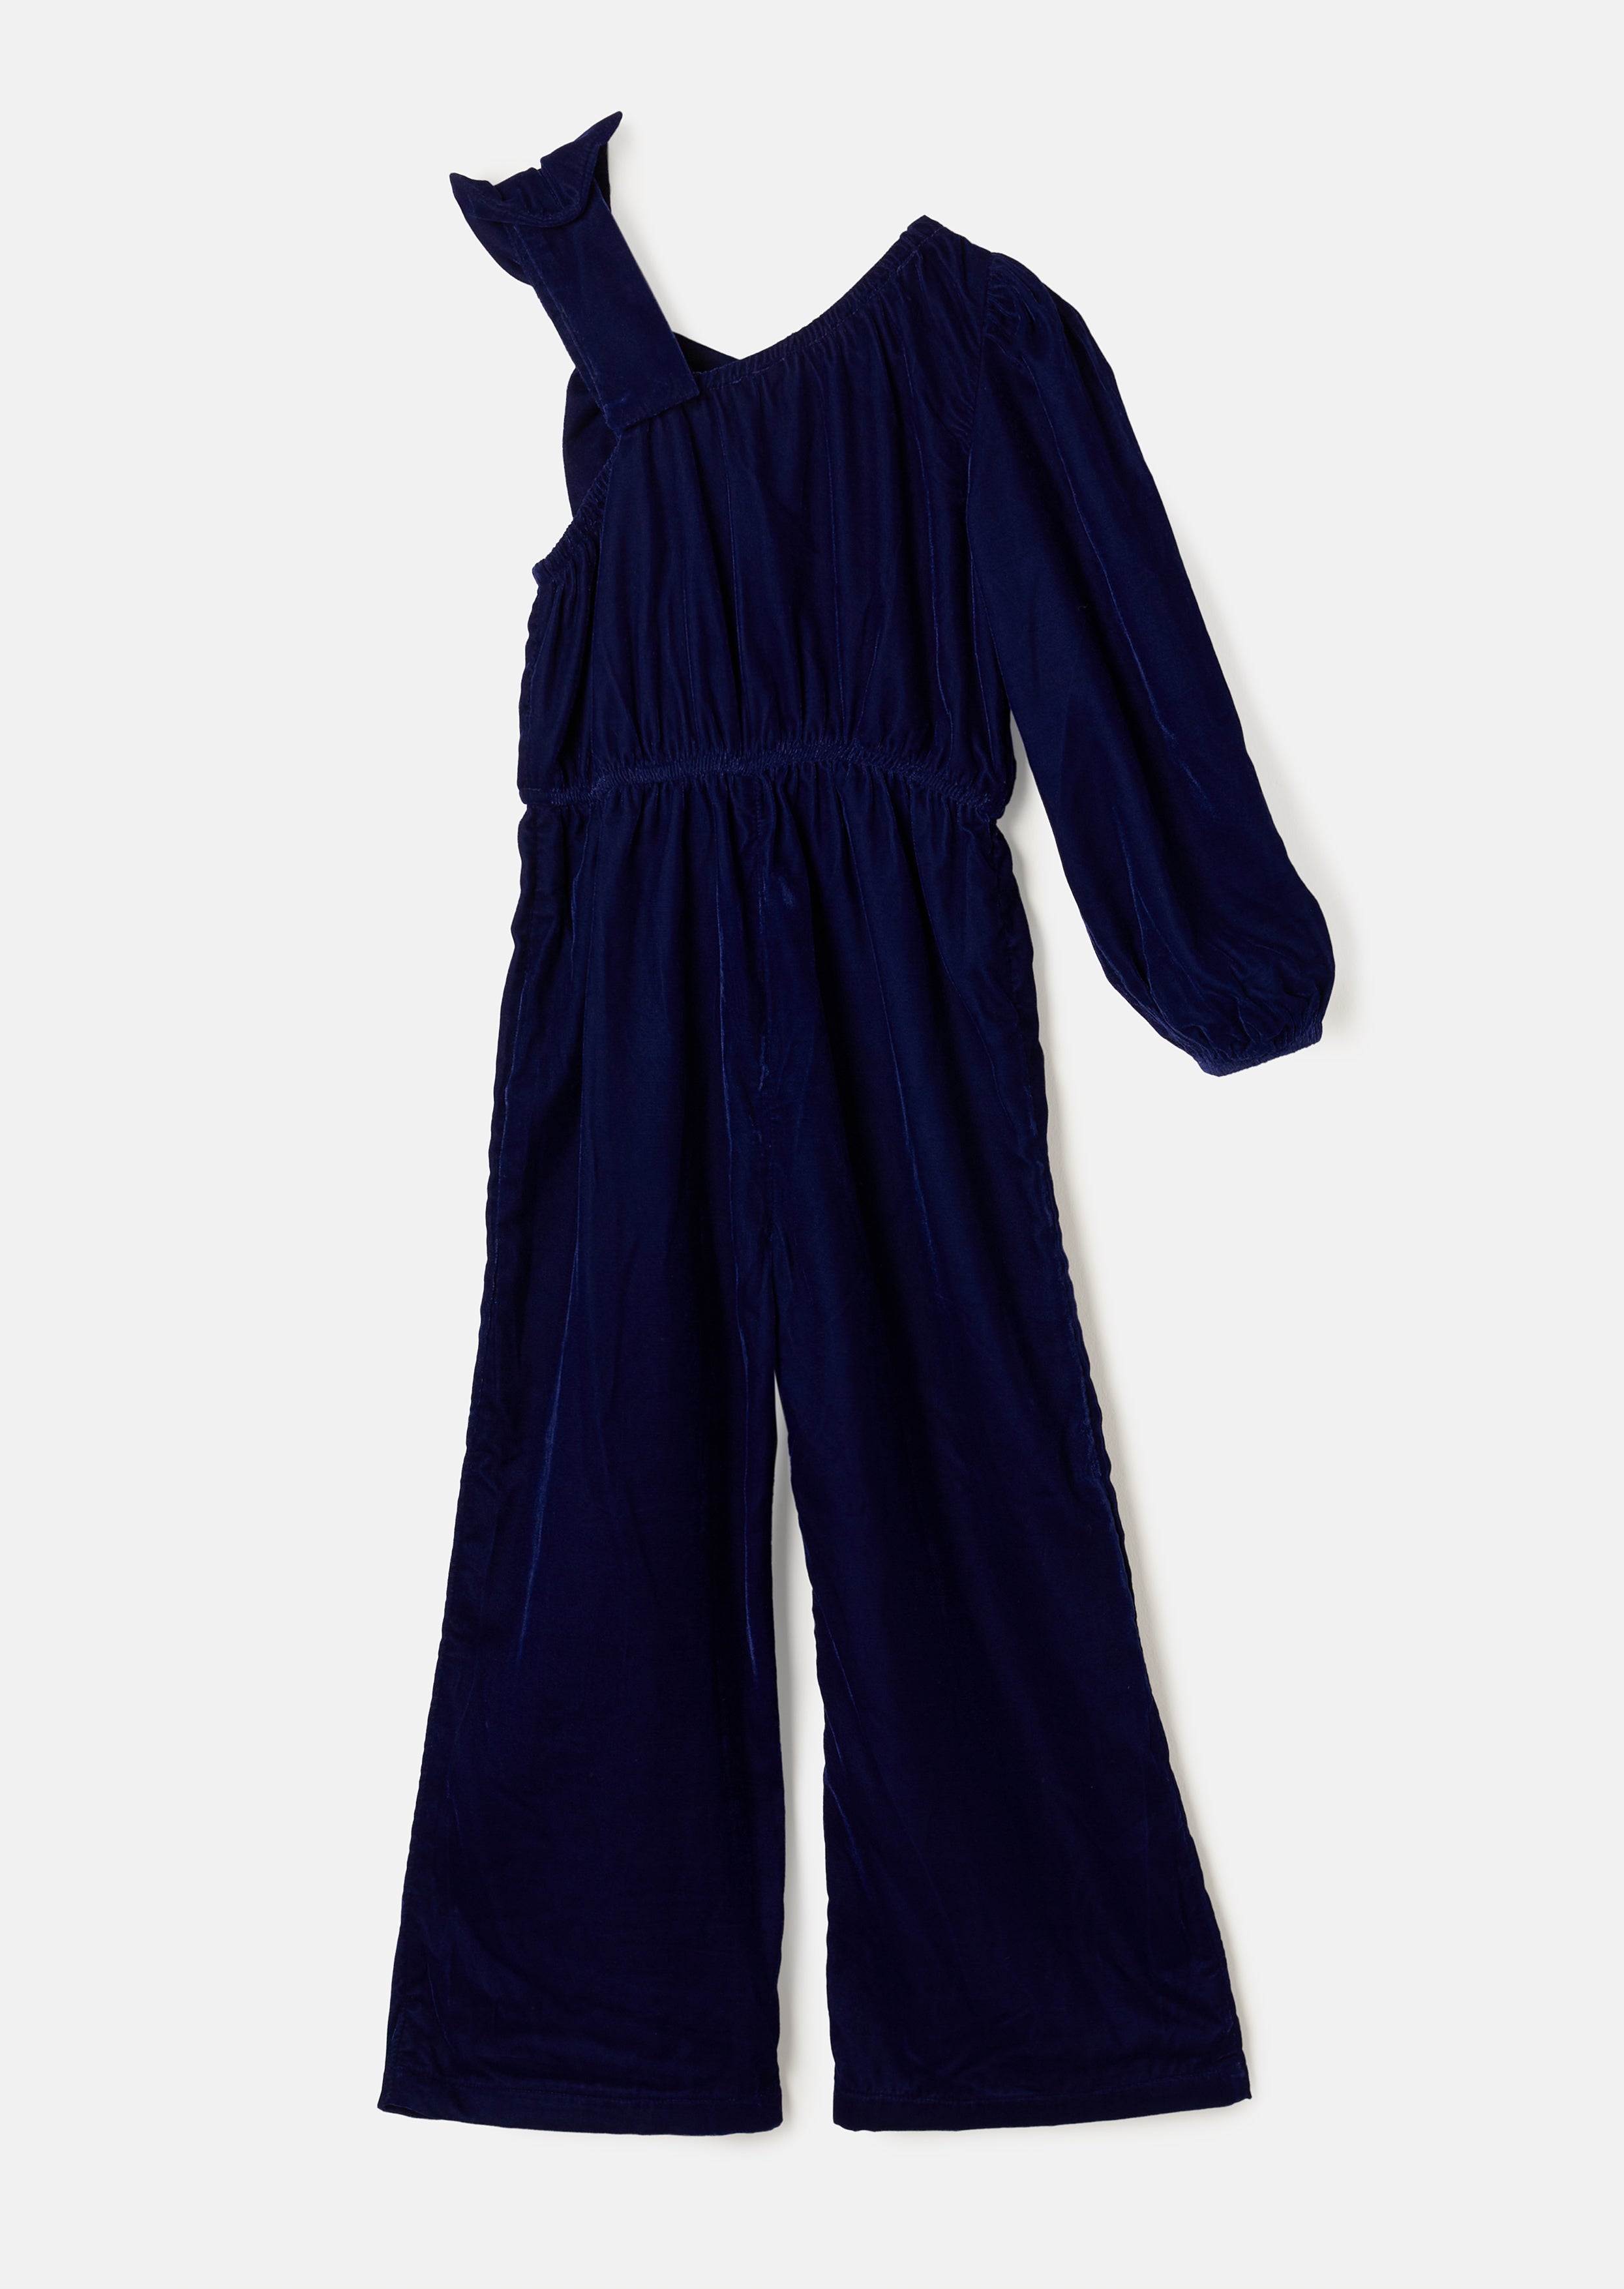 2024 Bell Sleeve Girl Pageant Purple Sequin Jumpsuit Dress For Birthday,  Formal Cocktail Party, On Stage Fun, Interviews, And Rising Star Toddler,  Teen, Little Miss From Uniquebridalboutique, $92.69 | DHgate.Com